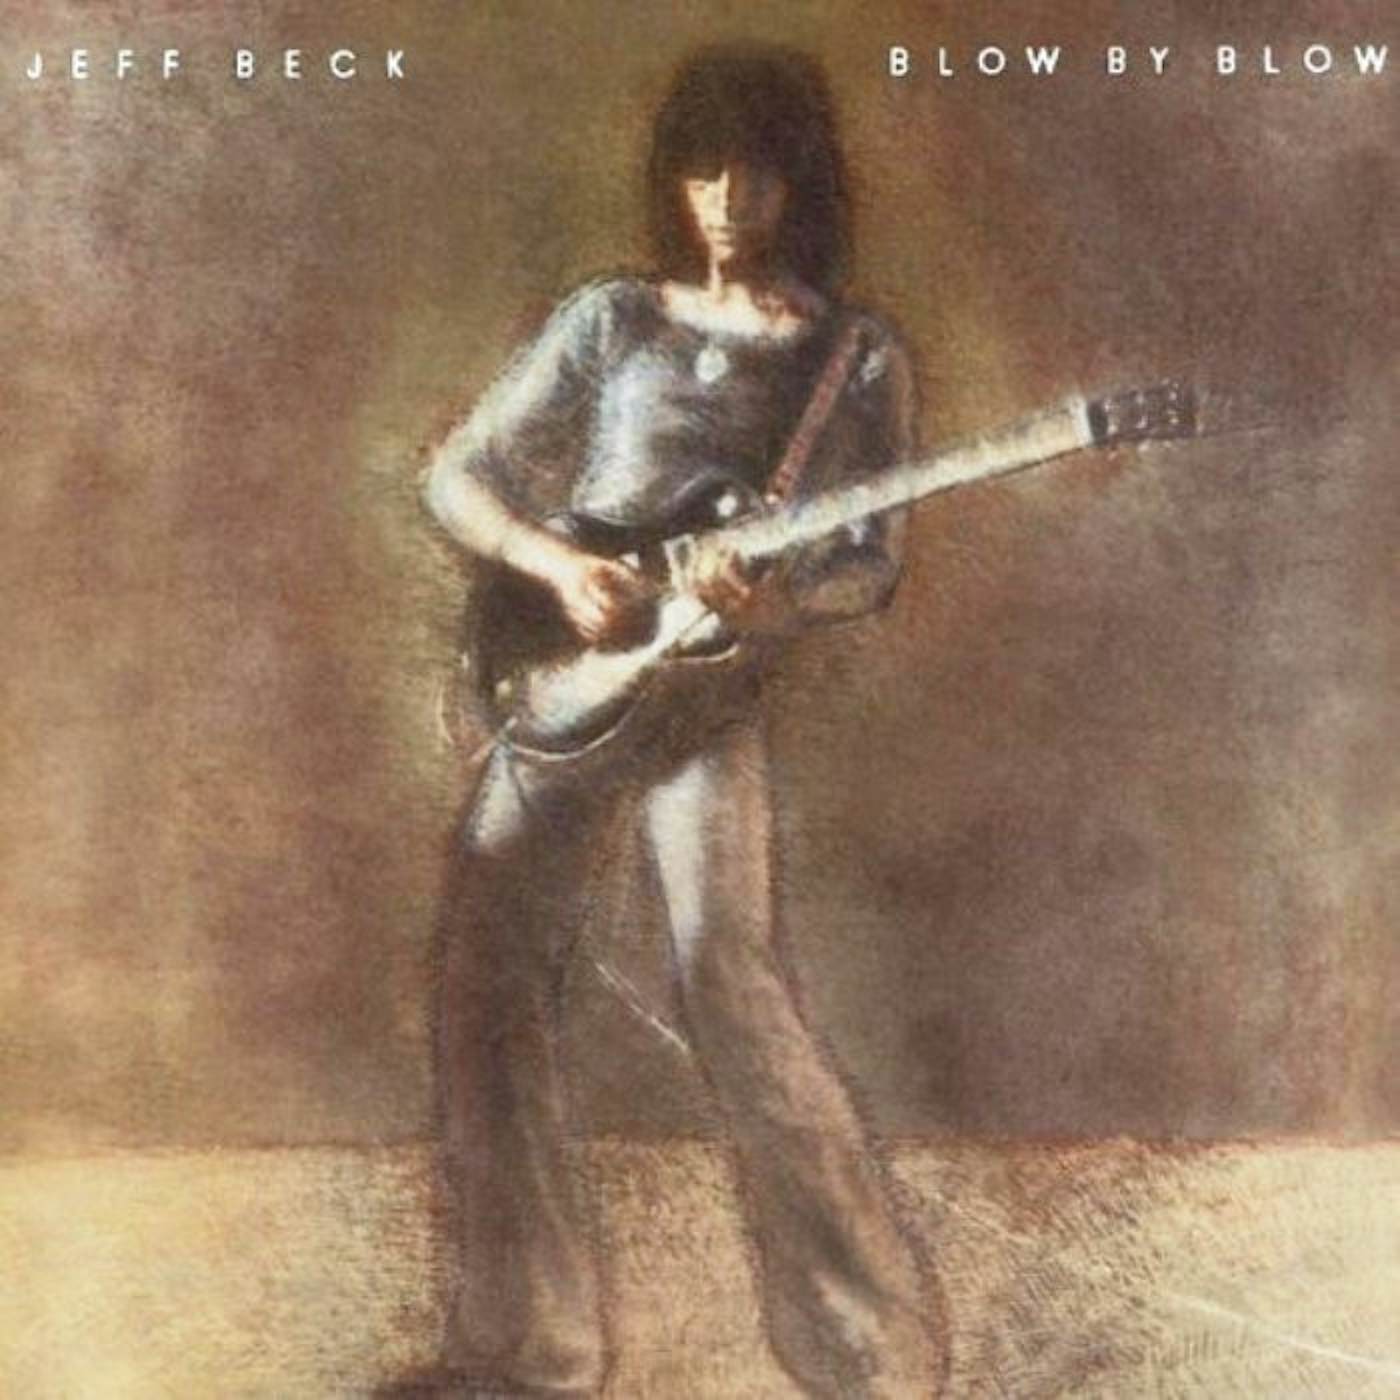 Jeff Beck BLOW BY BLOW (180G) Vinyl Record